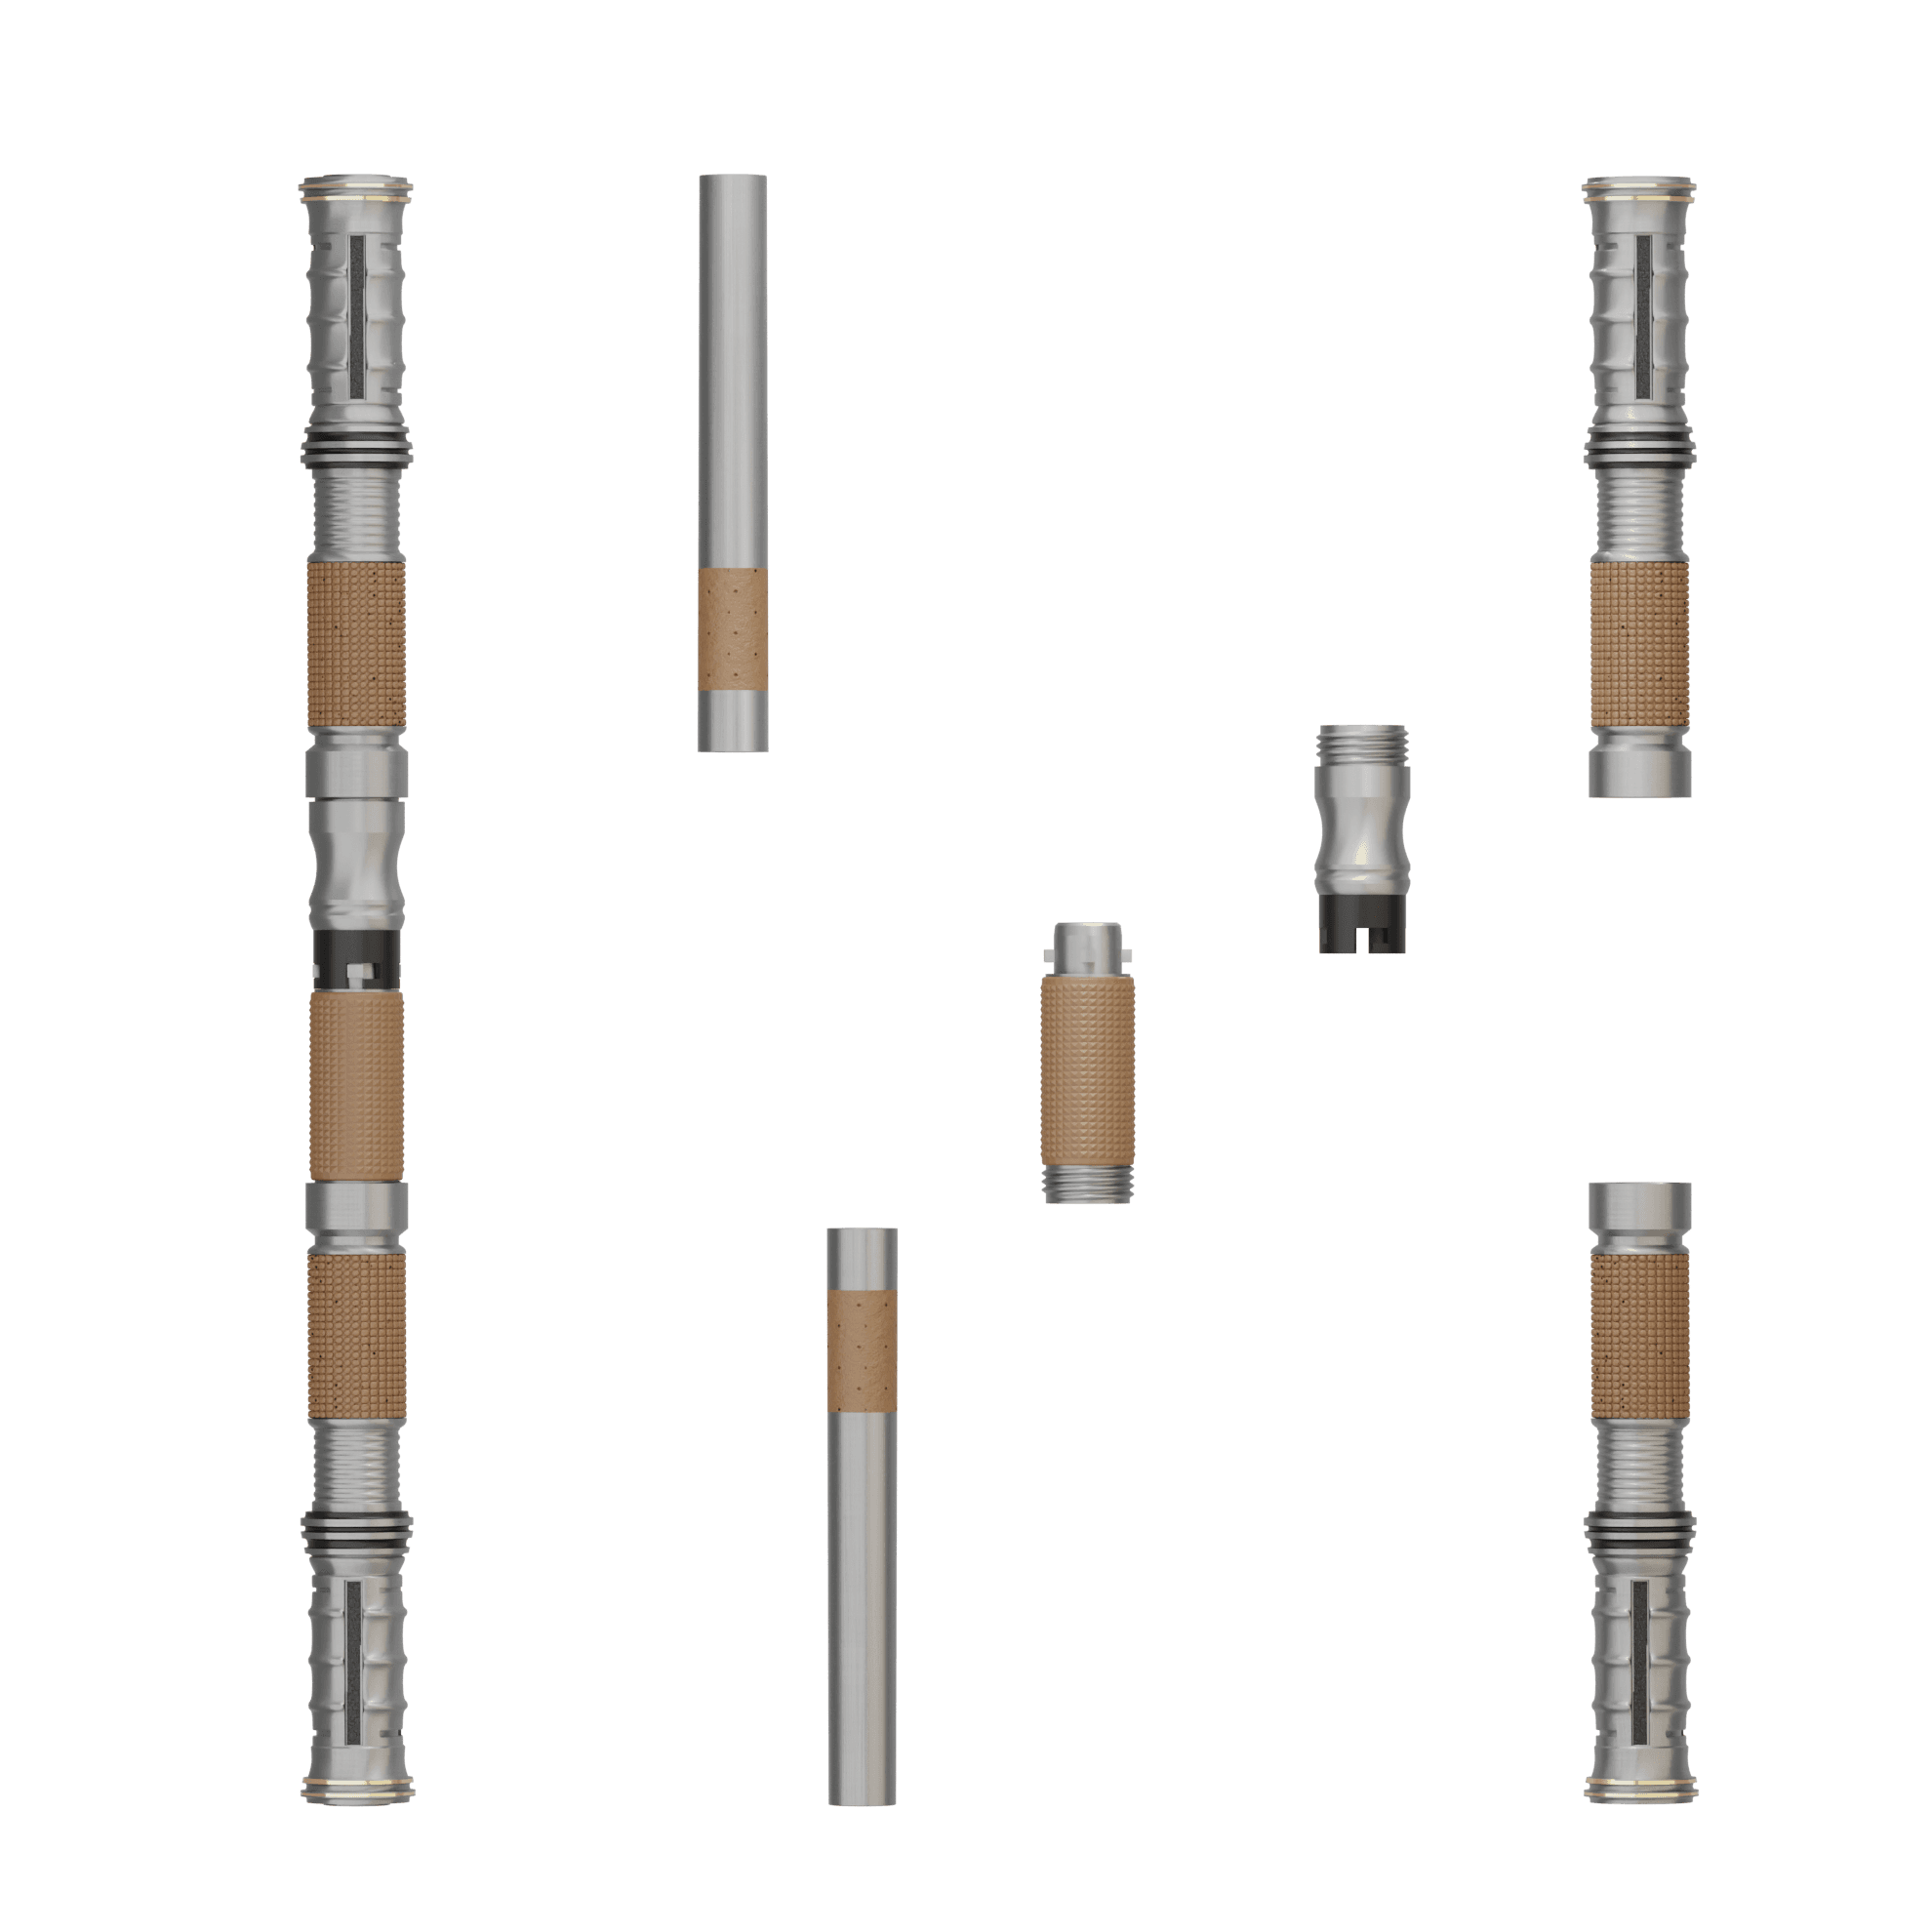 Print in Place Connecting Double Lightsaber Concept 3 3d model